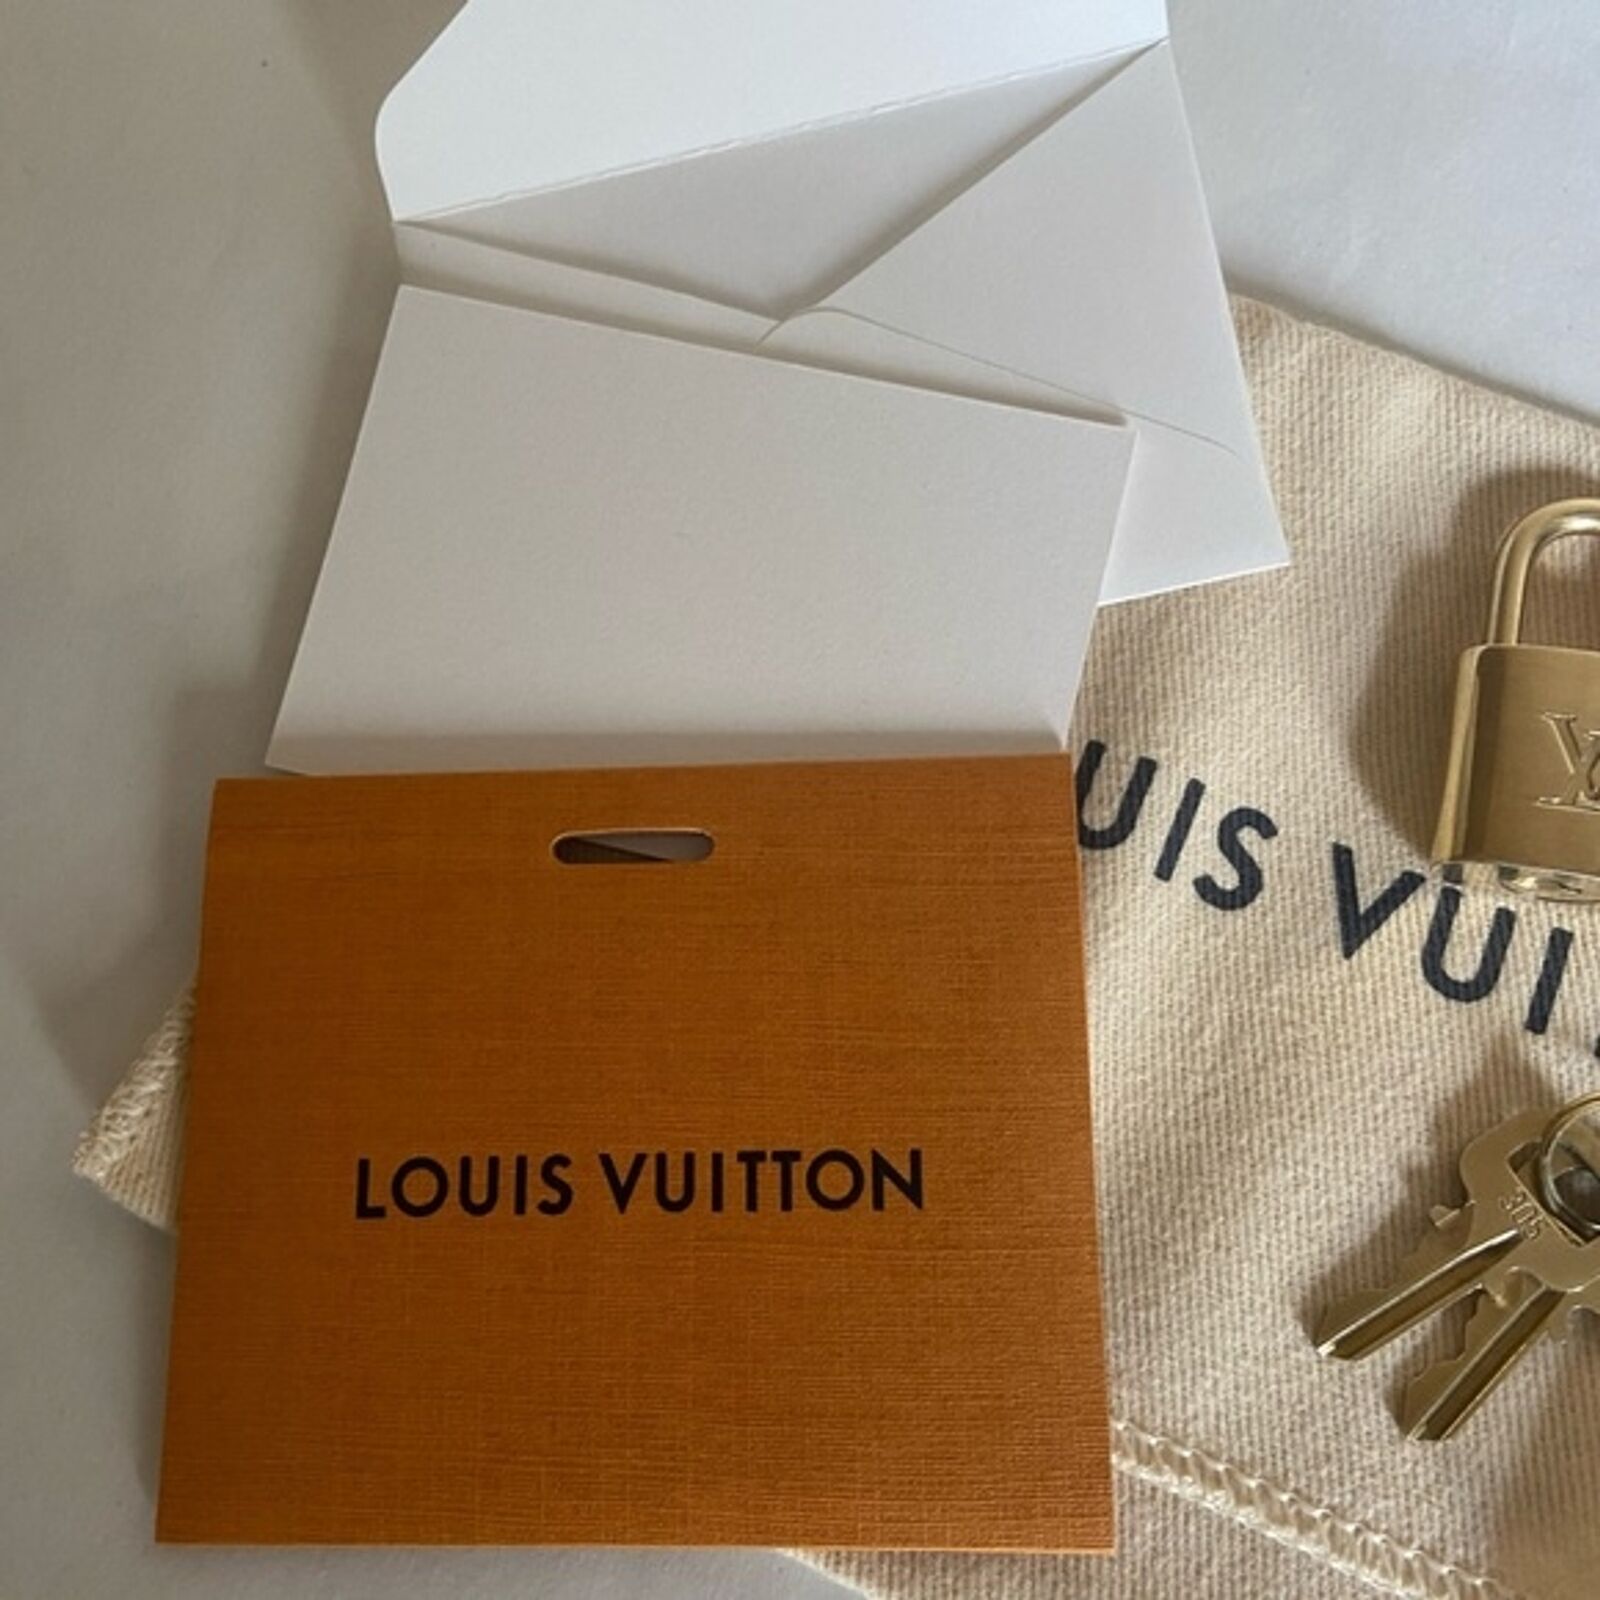 Louis Vuitton ca 36929 red plain rainbow jacket.. Brand New without Tag and  box.